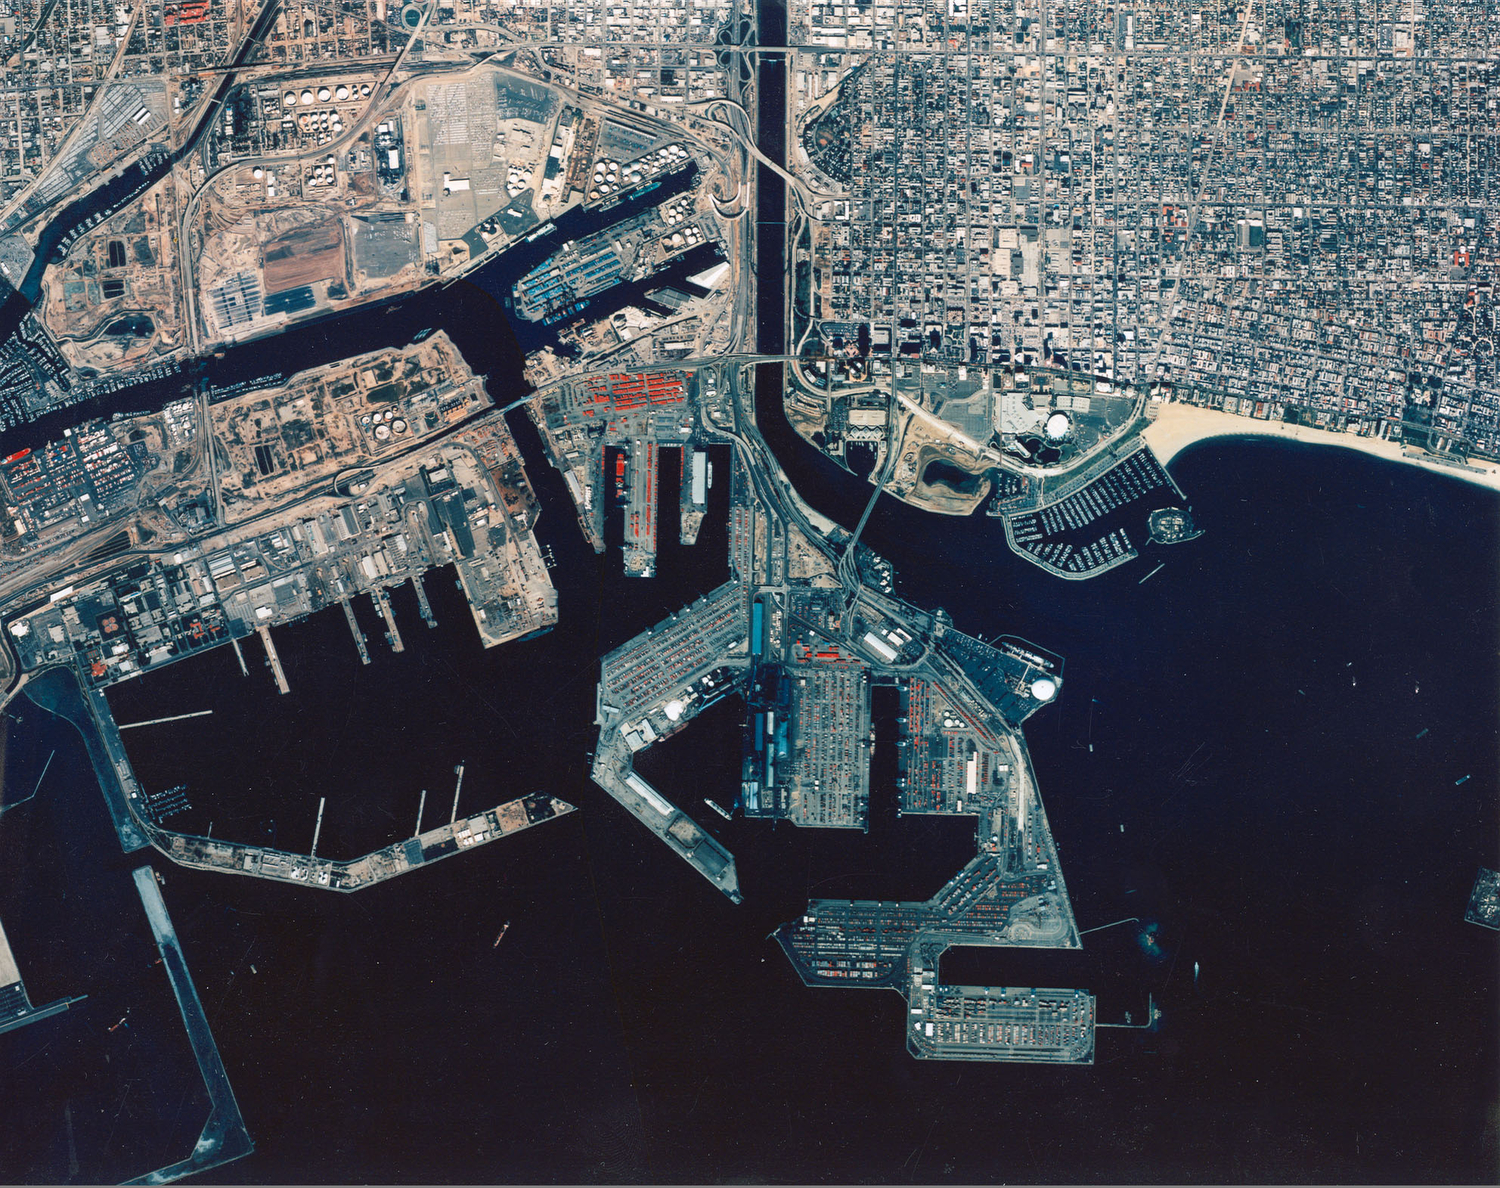 A 1997 satellite view of the Port.